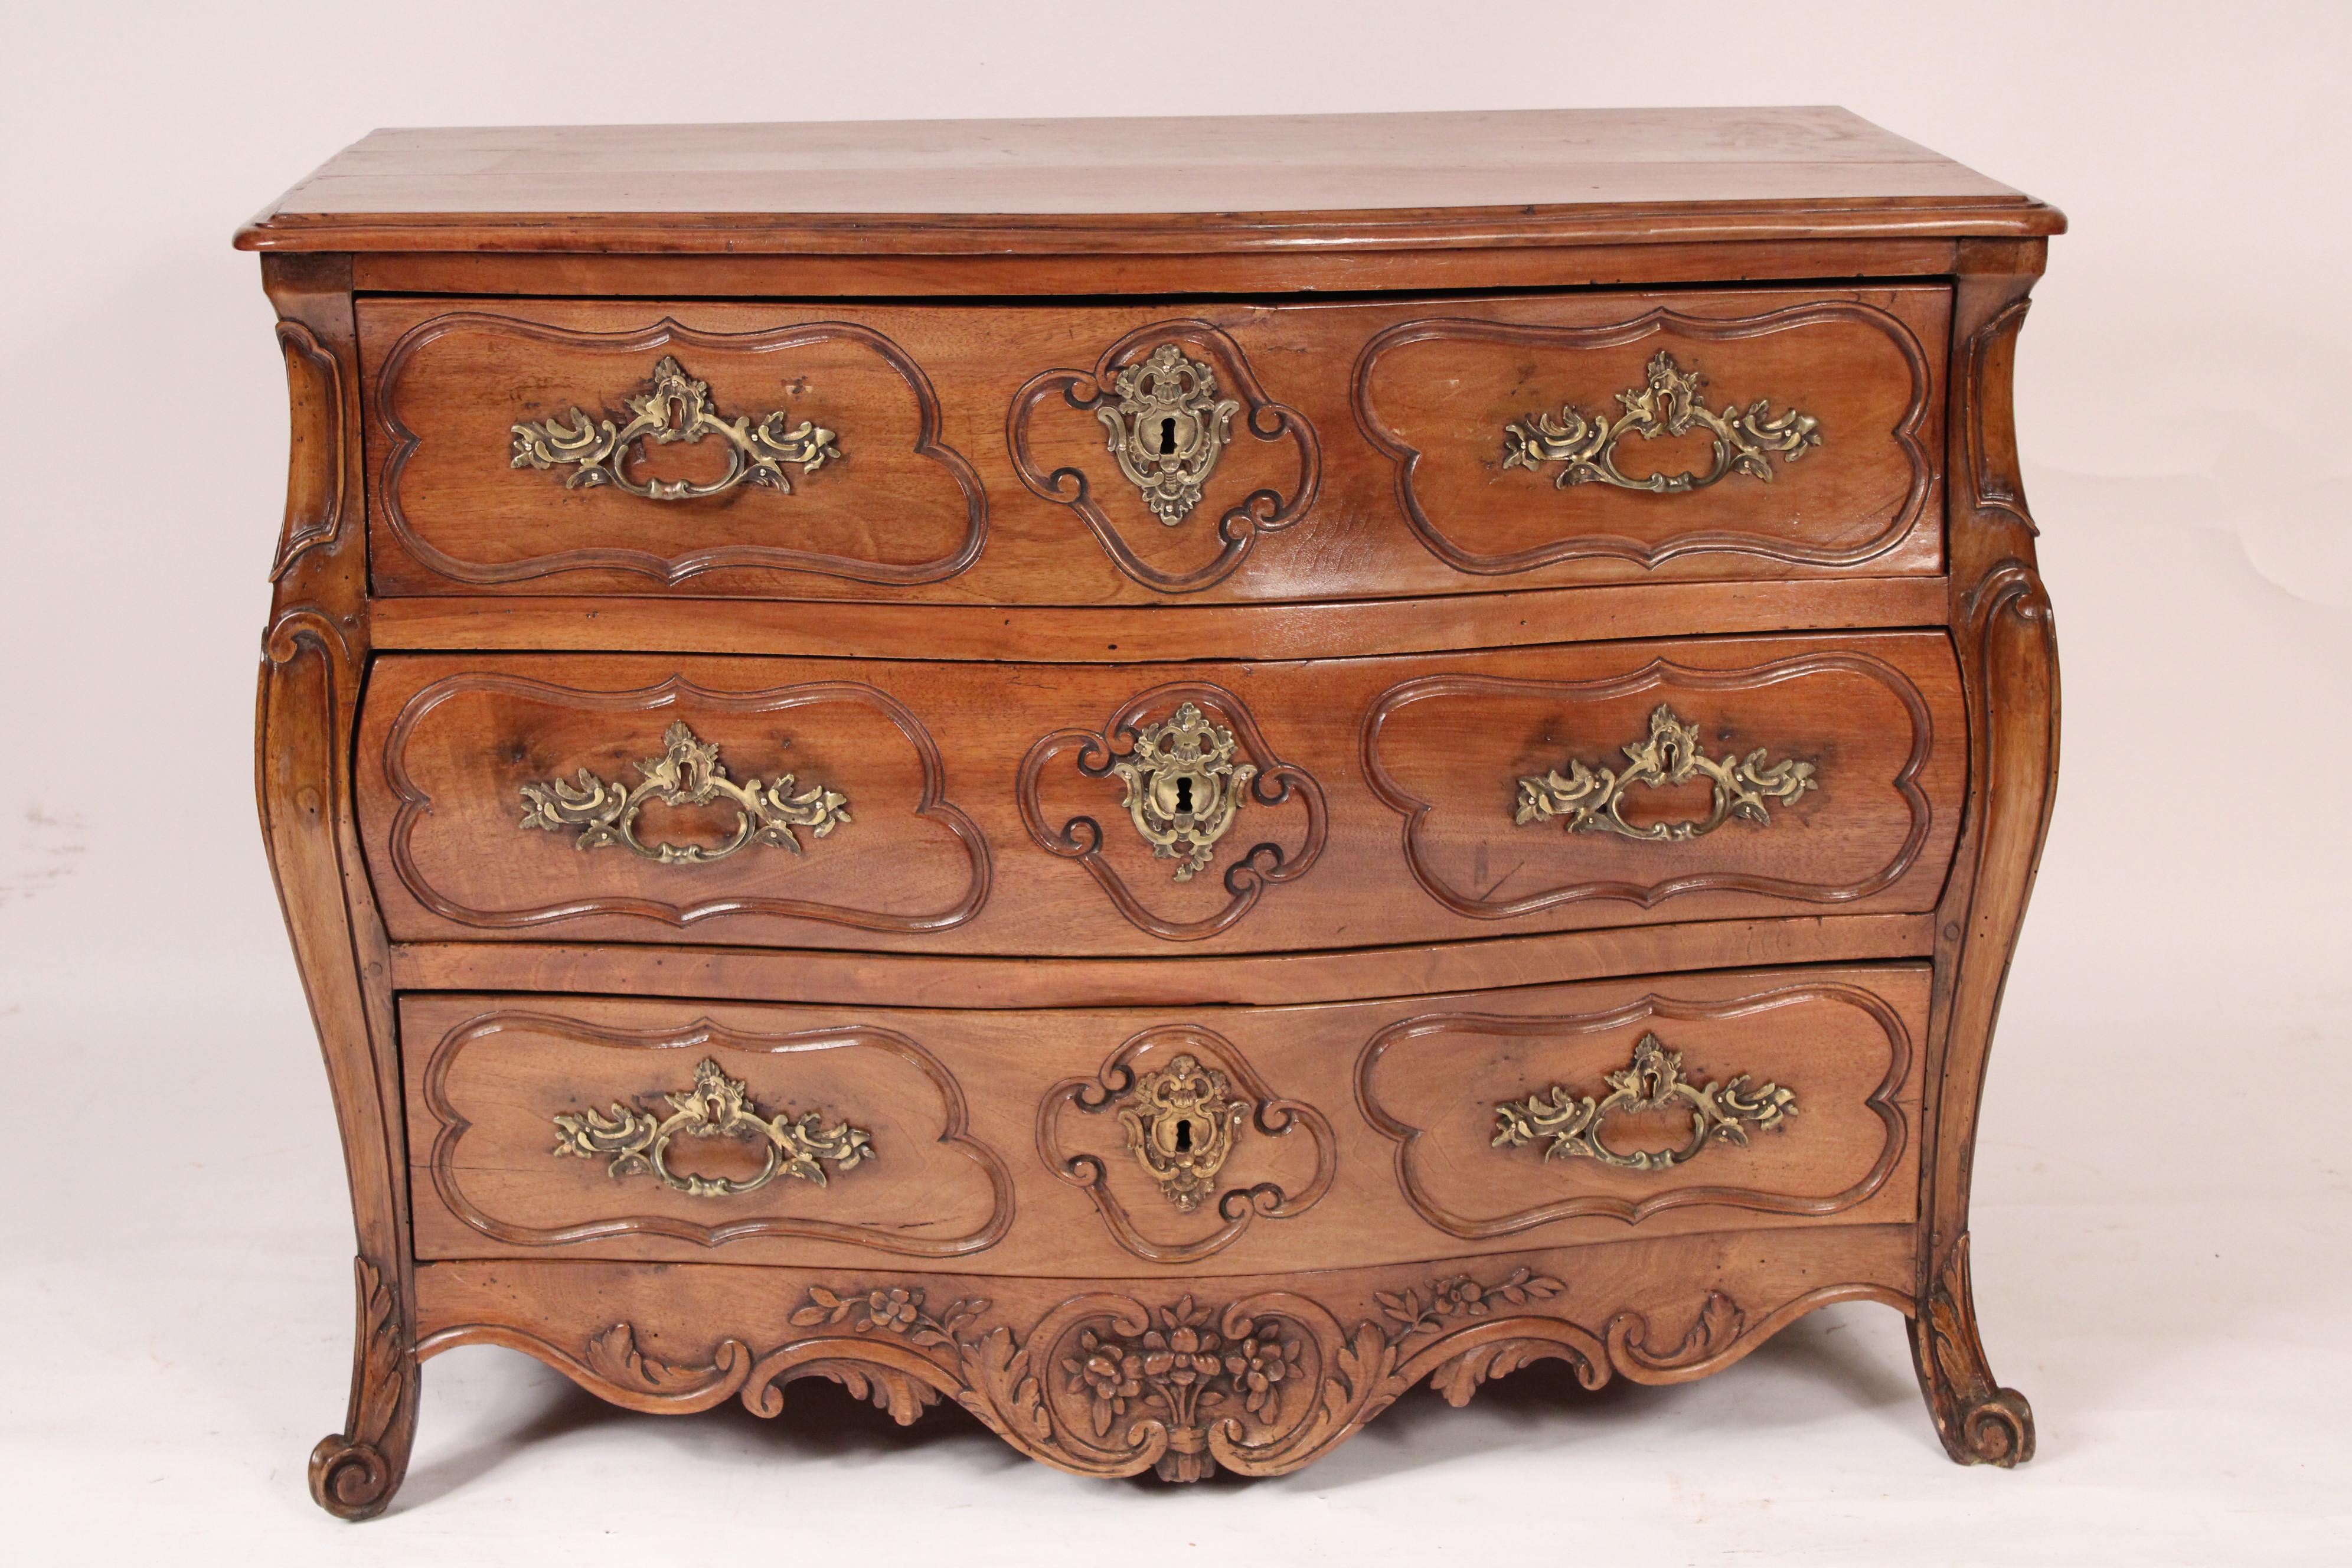 Antique Louis XV style provincial bombe walnut chest of drawers, 19th century. With a two board walnut top with thumb molded front and side edges, 3 bombe shaped drawers, rococo shaped apron with central floral carving, resting on acanthus carved